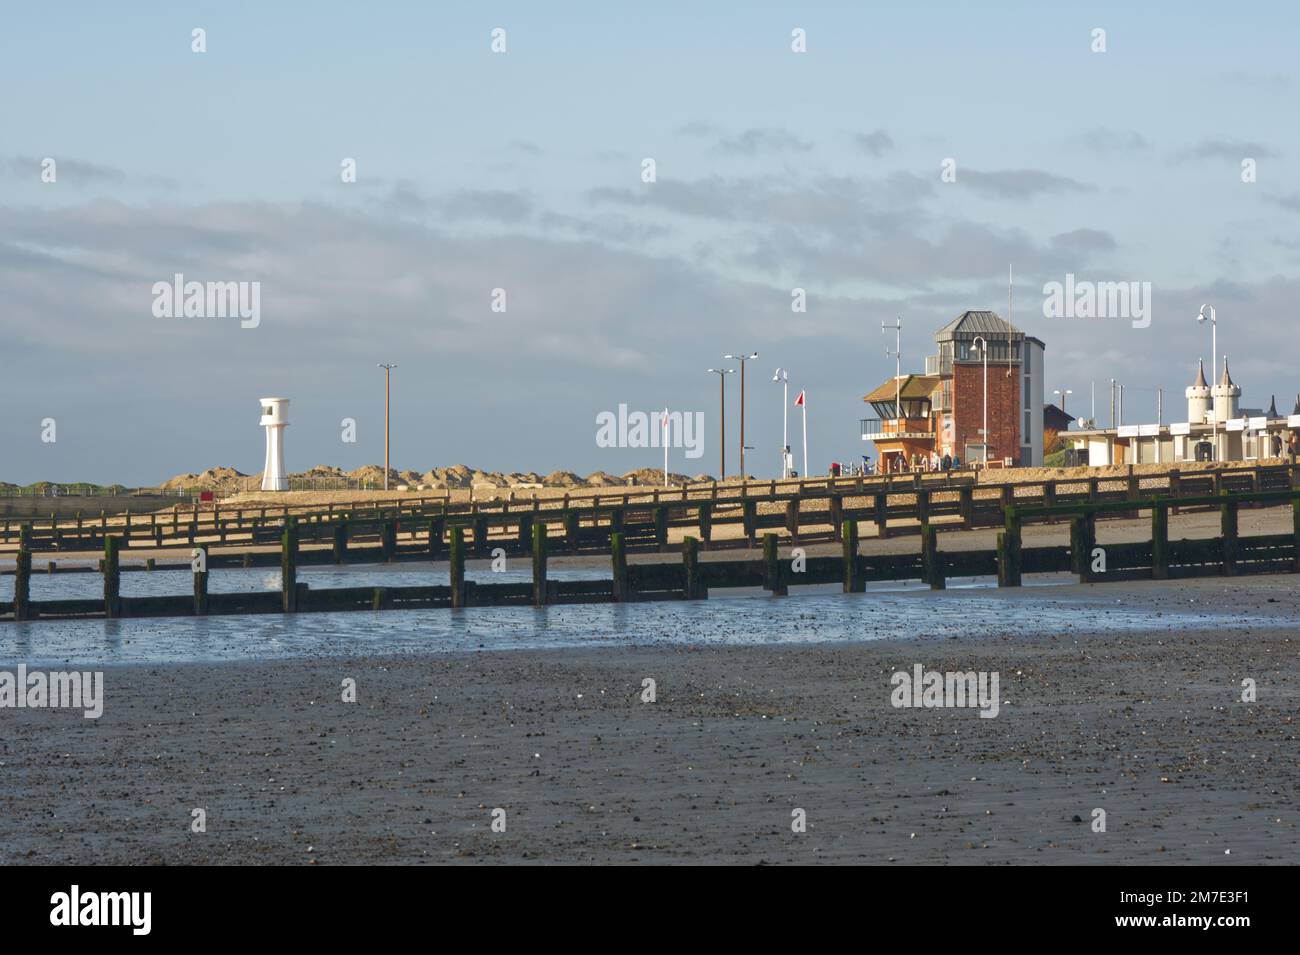 Seafront at Littlehampton in West Sussex, England. Viewed from beach at low tide. Stock Photo